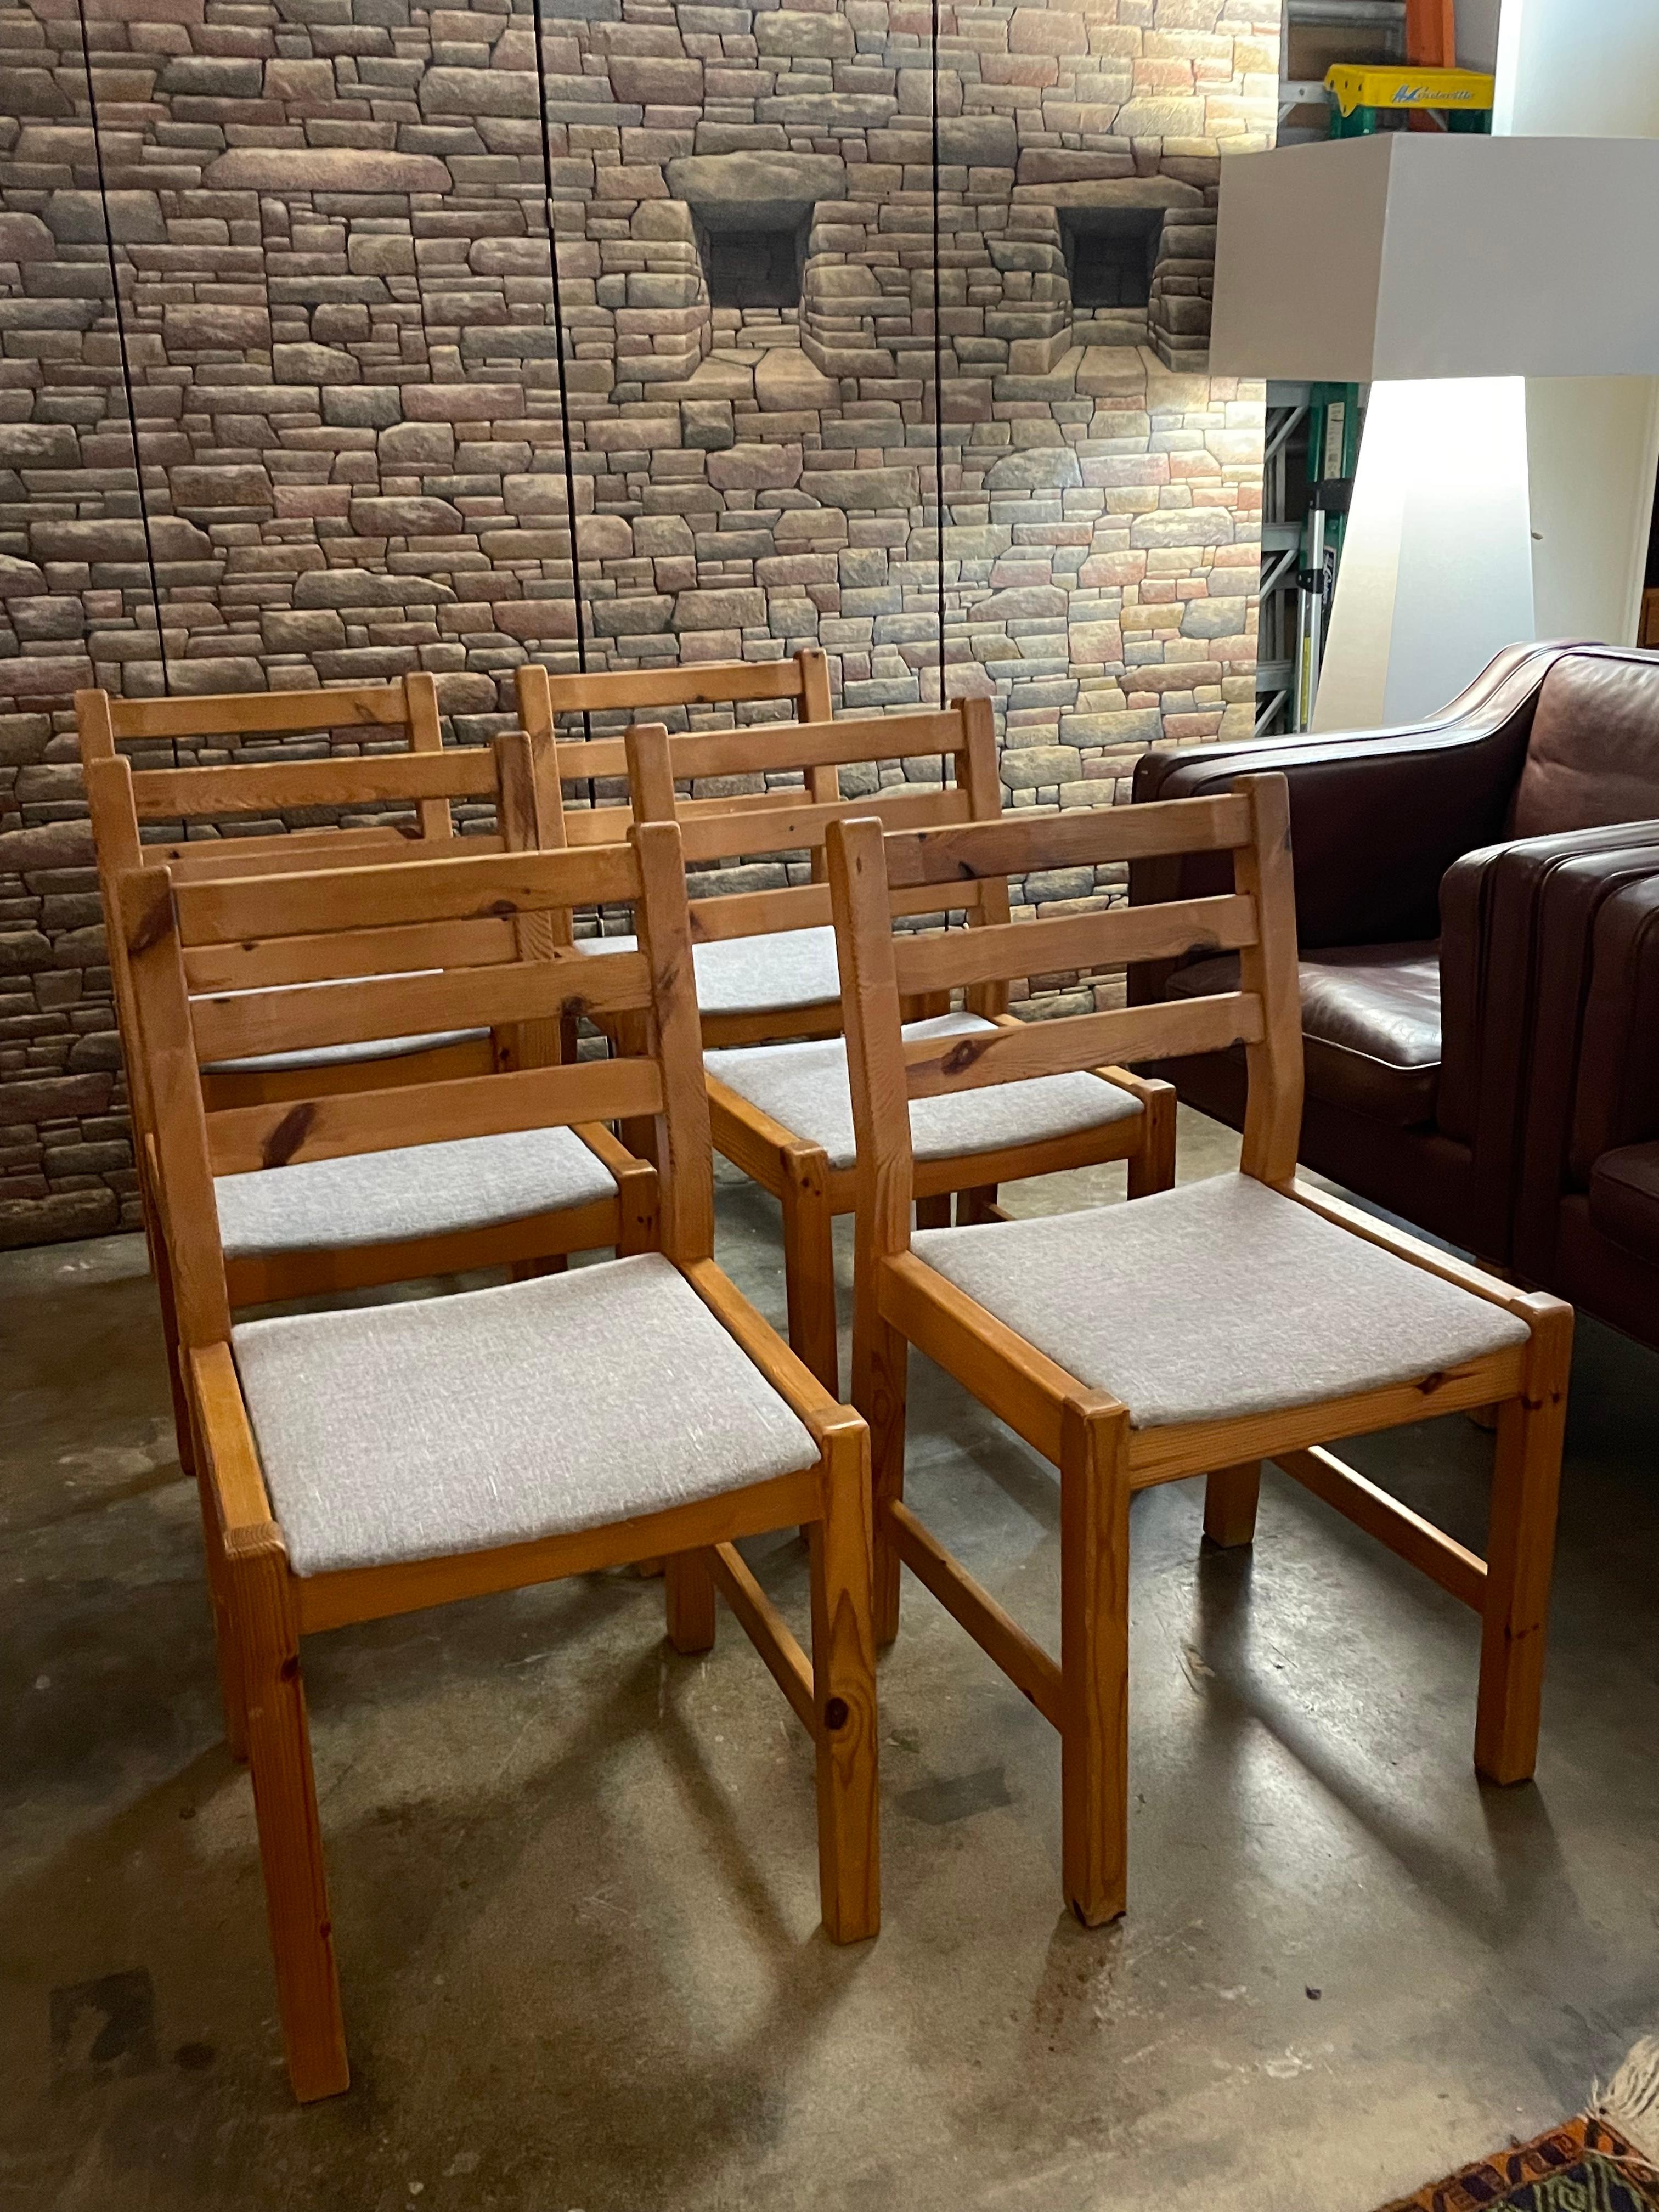 Set of 6 Danish pine dining chairs, circa 1970s features fabric covered seating in gray (photo shows accurate color). 

Dimensions:18.75